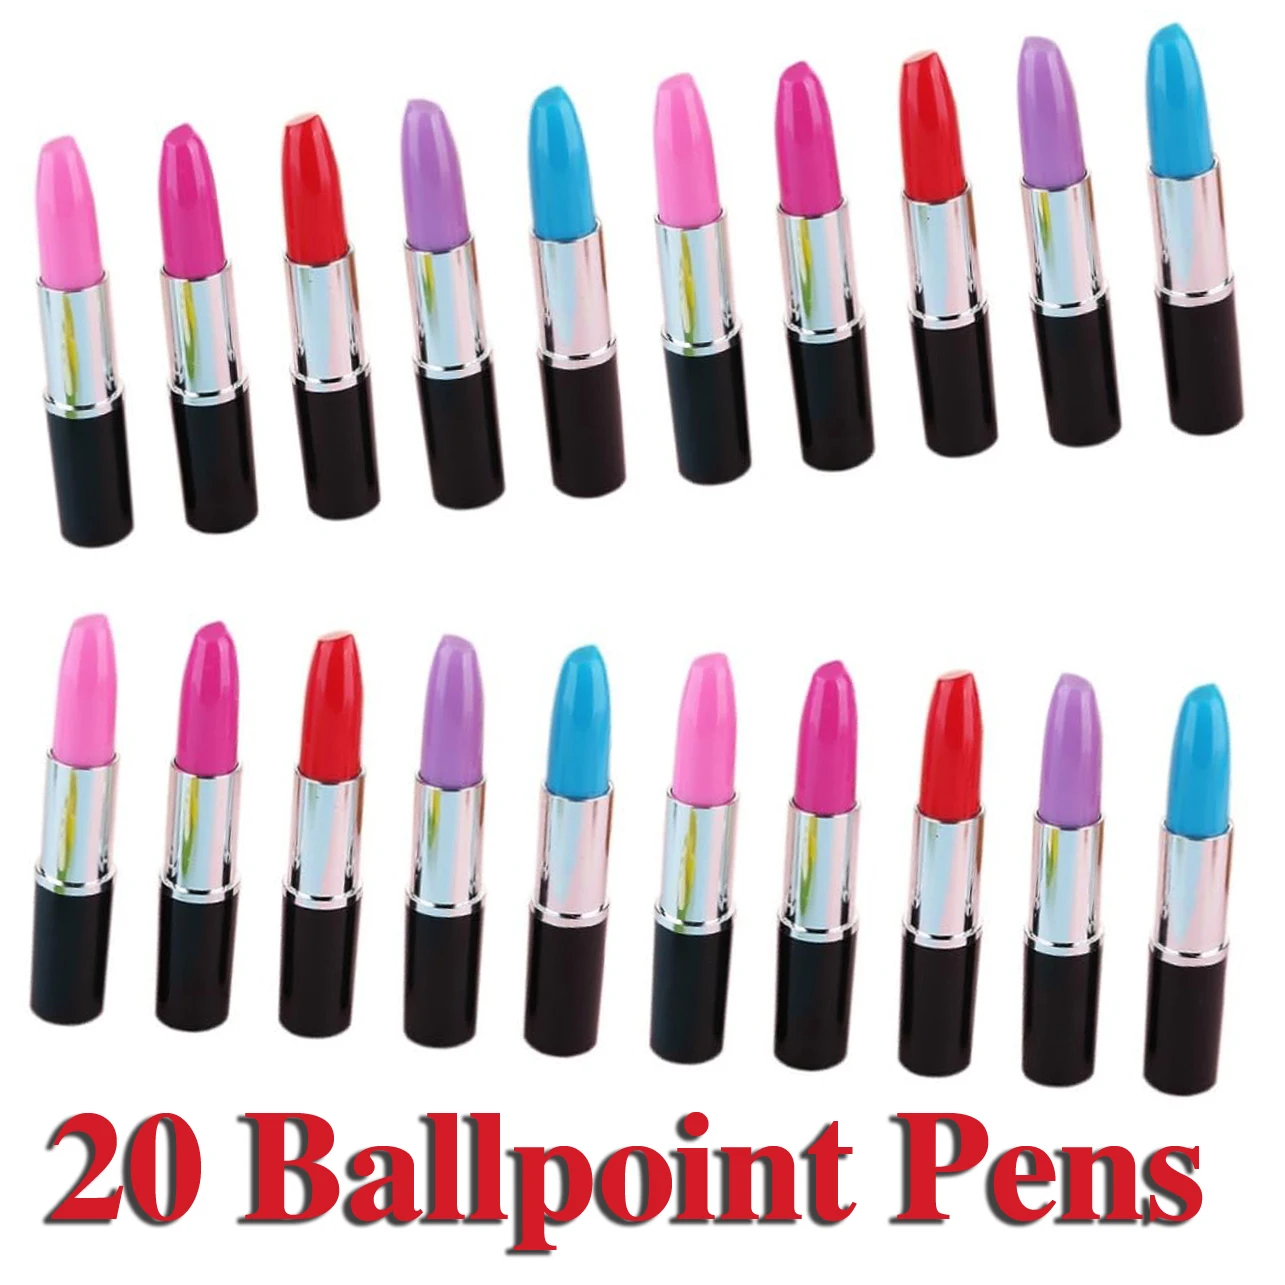 20pcs Lipstick Ball-Point Pen Creative Beautiful Ball-Point Pen Lipstick Sign Pen Girl Gift for Home Store School e0bf 2pcs creative silicone mold diy star sign bookmarks mould epoxy moulds